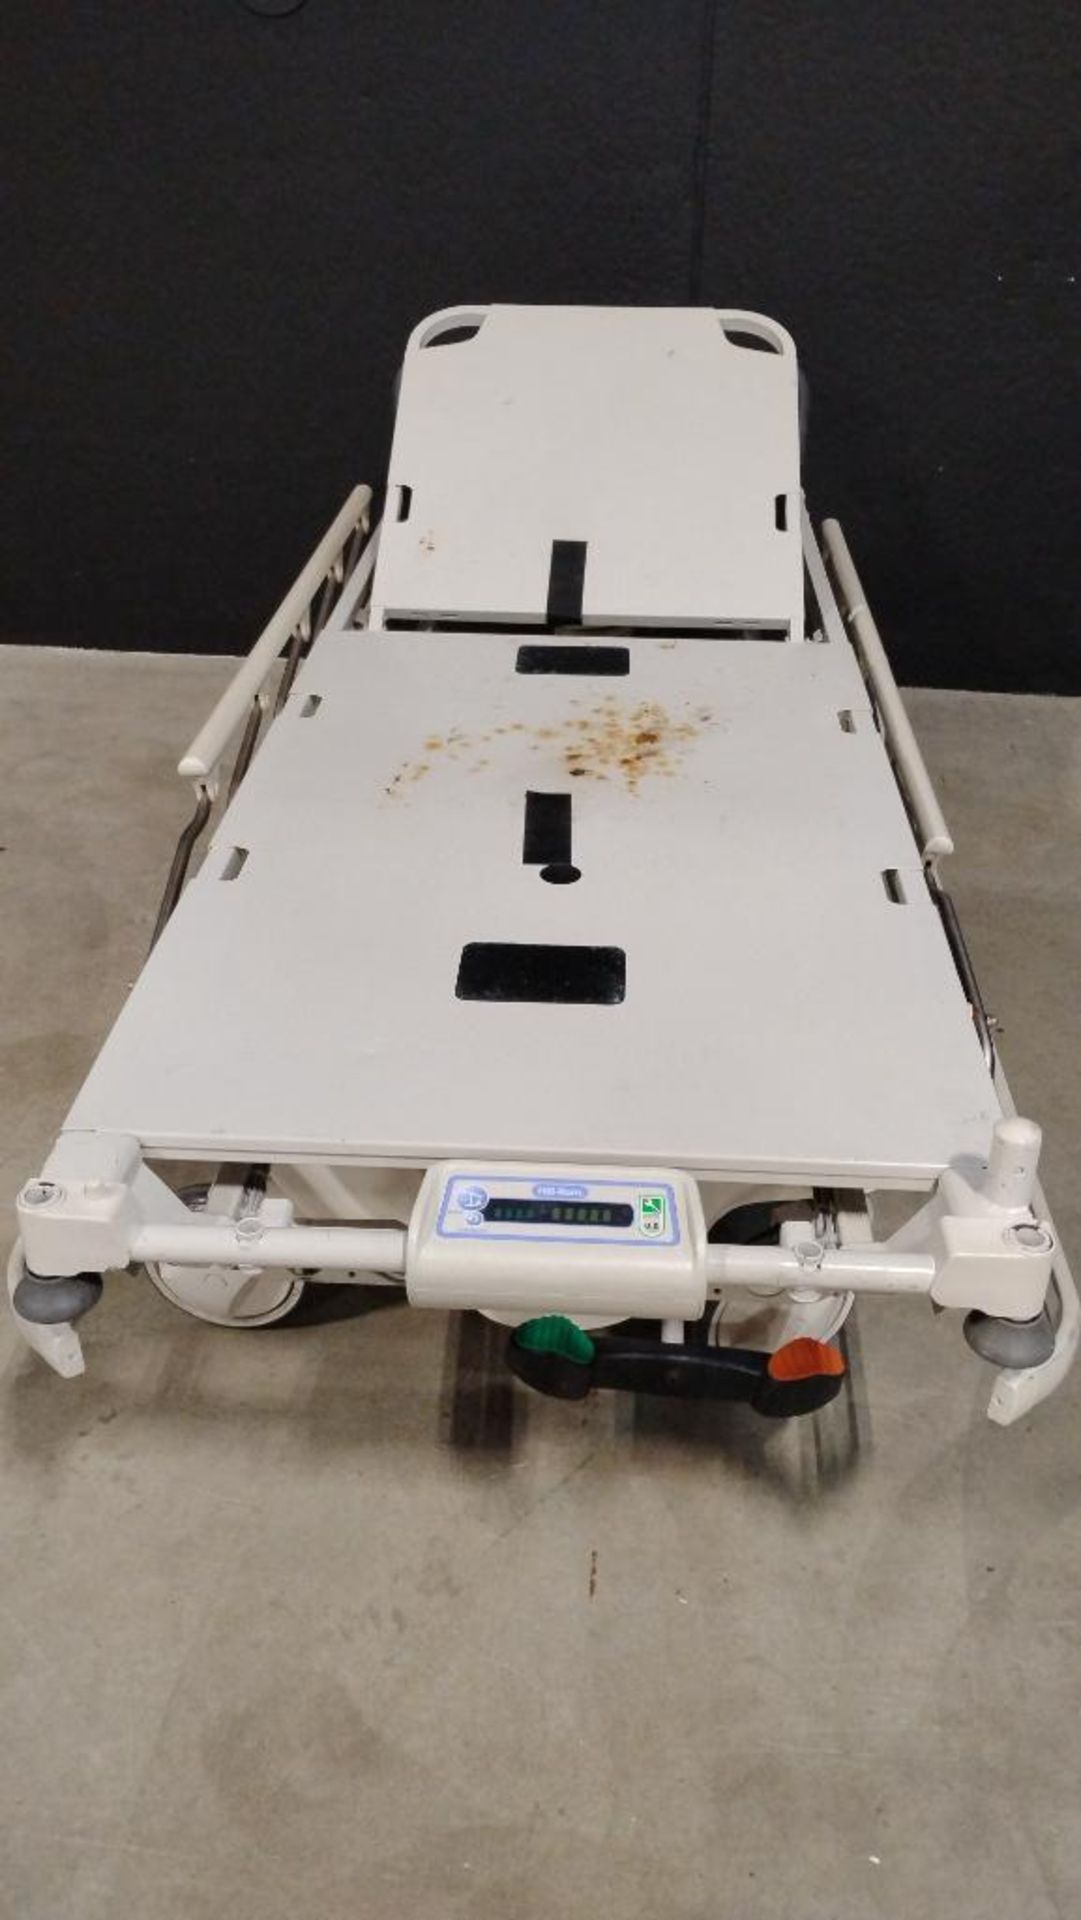 HILL-ROM P8000 STRETCHER WITH SCALE (700LBS) - Image 4 of 4